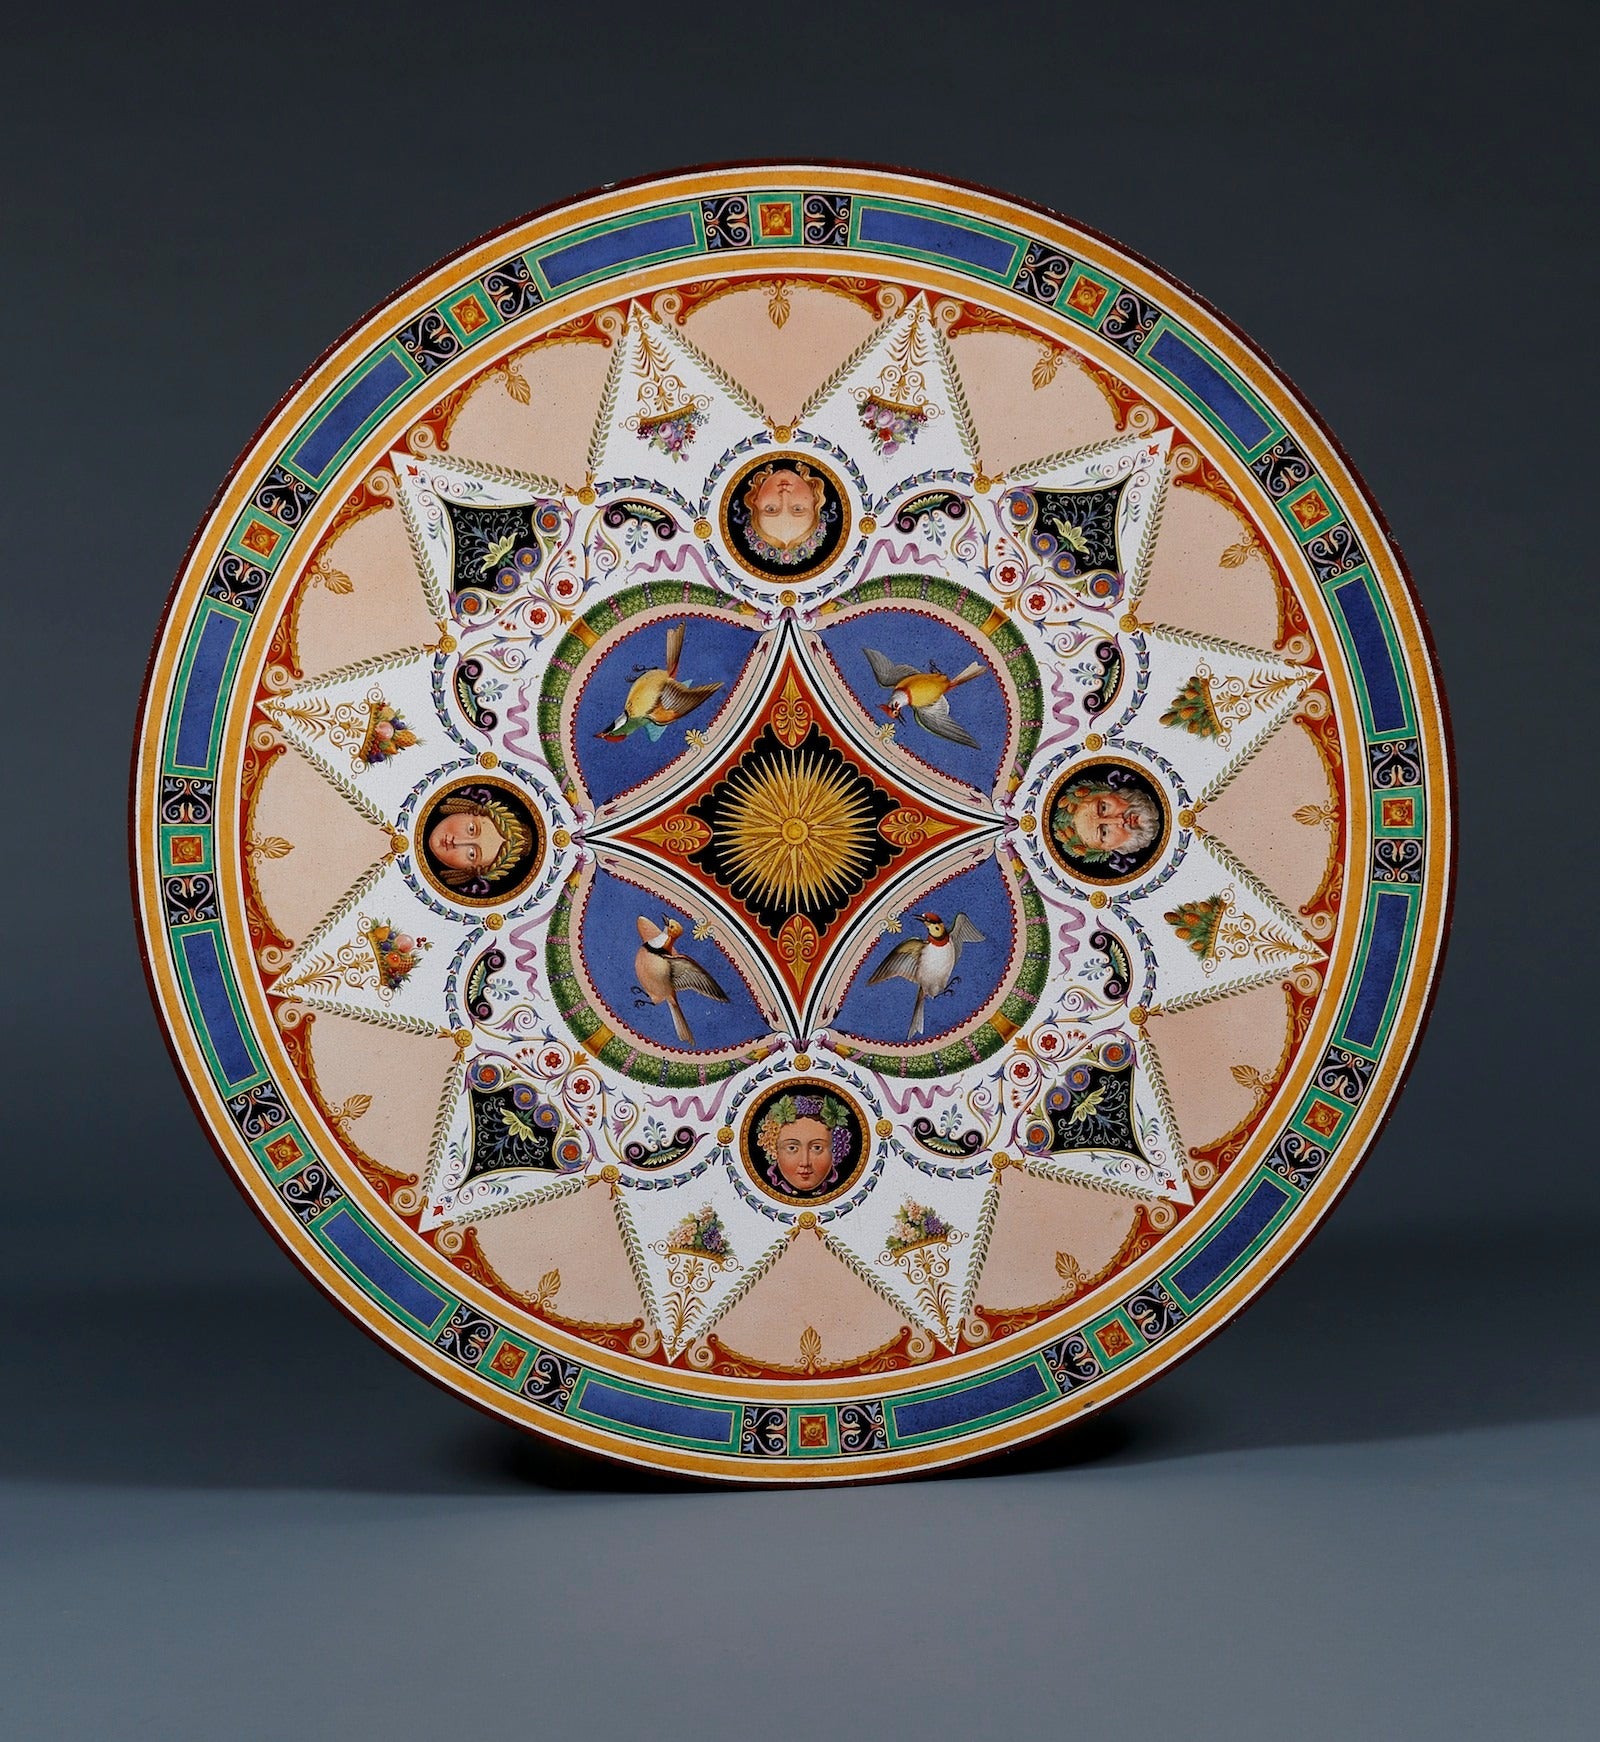 A Polychrome Table-Top Designed By Hittorff With Its Original Table Base For Sale